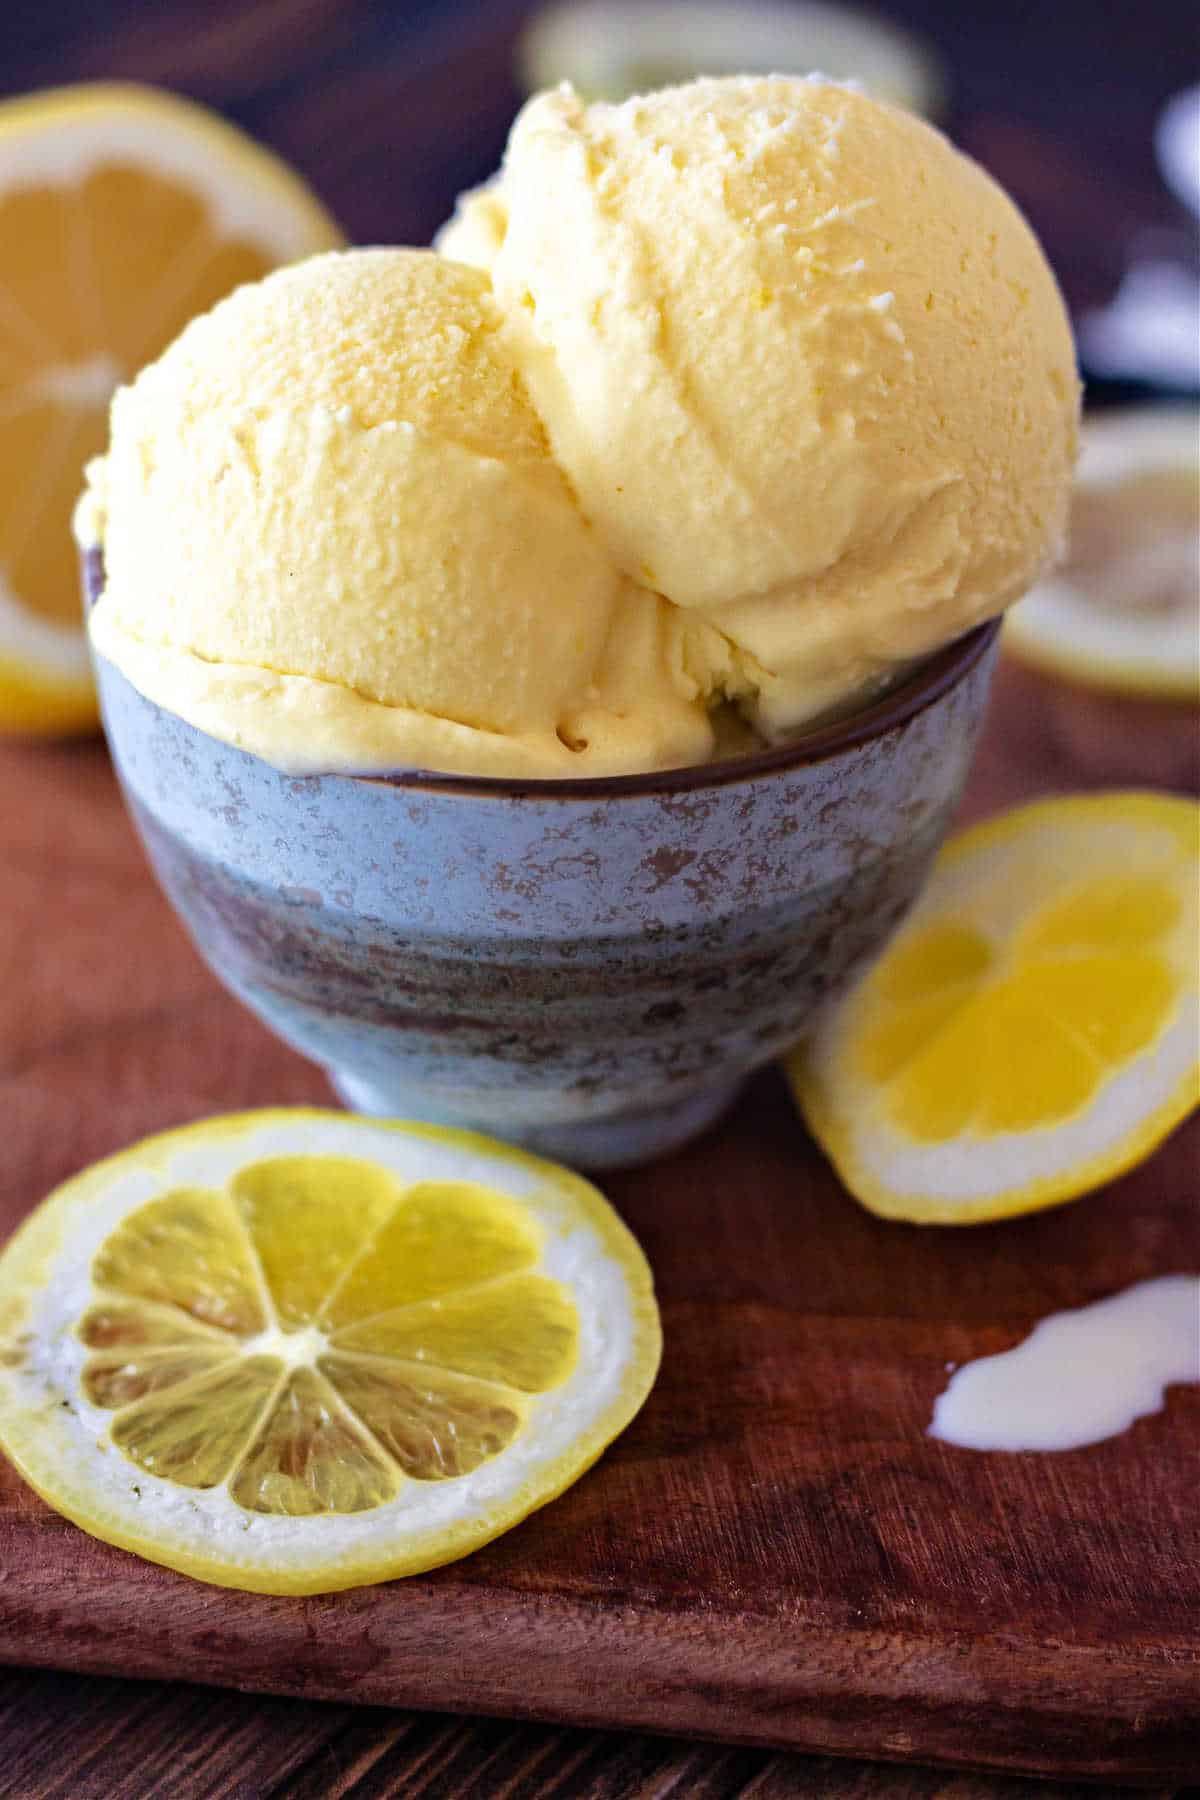 A small blue bowl with scoops of lemon ice cream in it and lemon slices on a wooden surface.